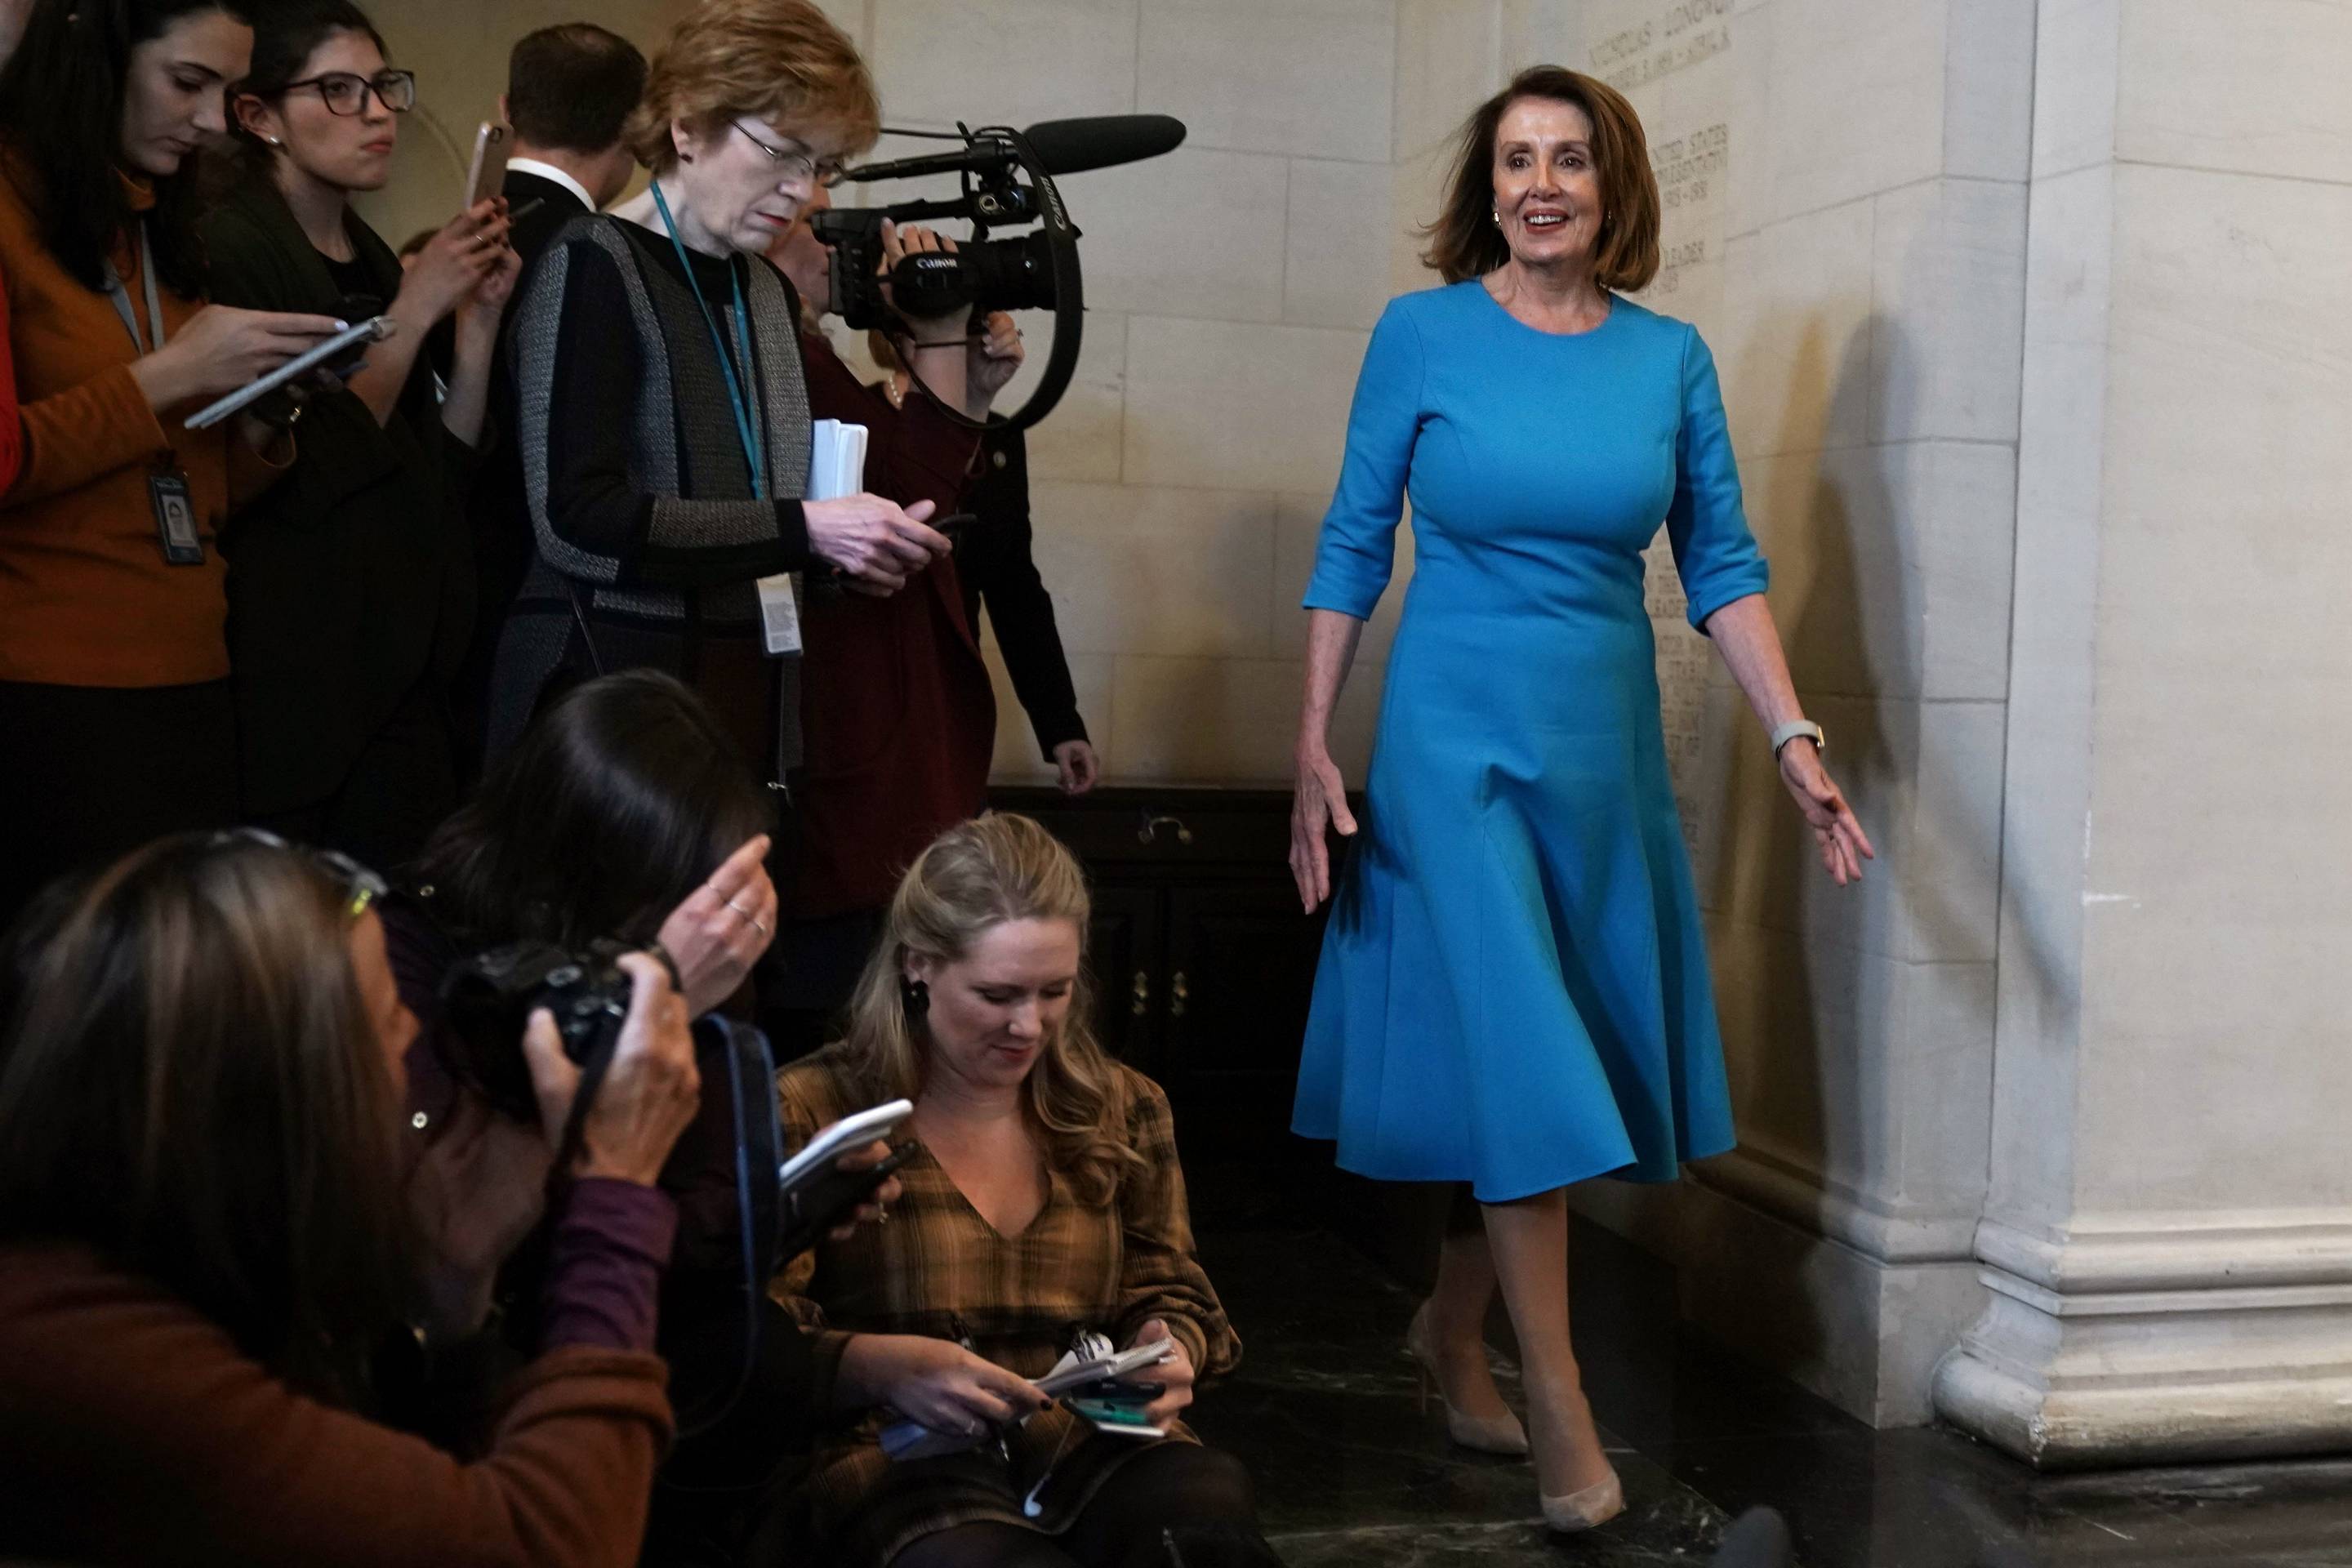 chrissy schwartz recommends nancy pelosi large breasts pic